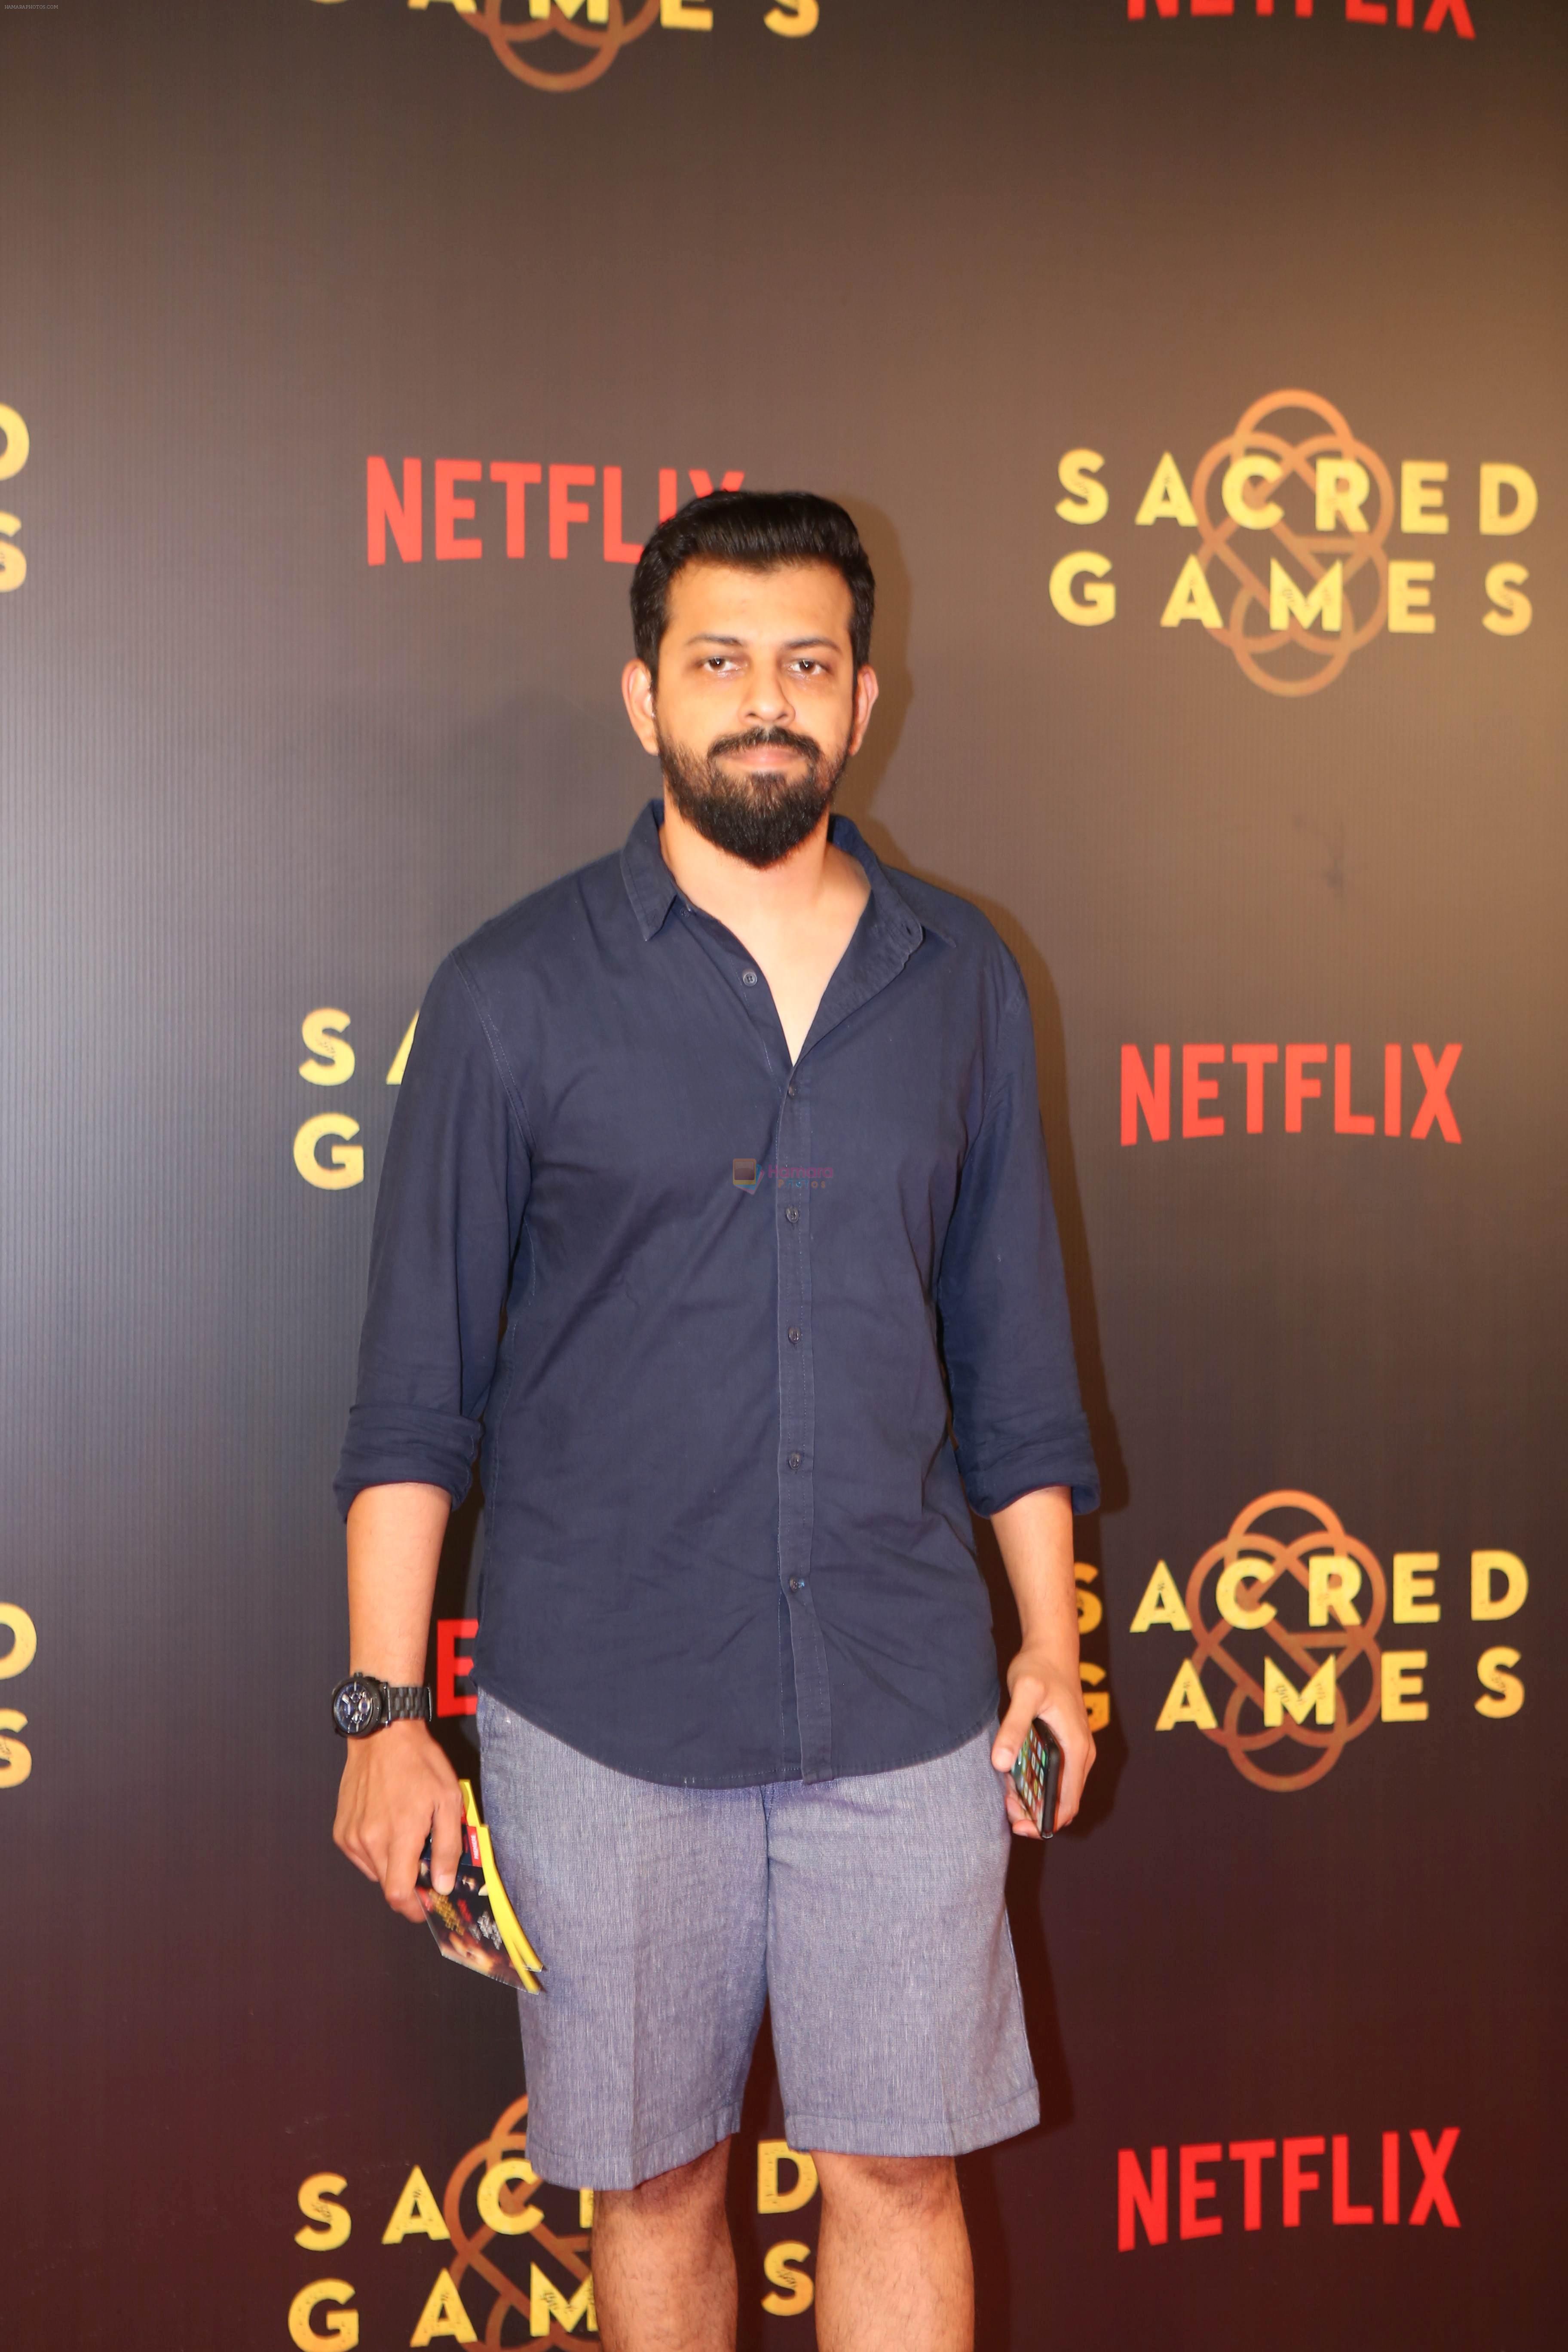 Bejoy Nambiar at the Screening of Netflix Sacred Games in pvr icon Andheri on 28th June 2018